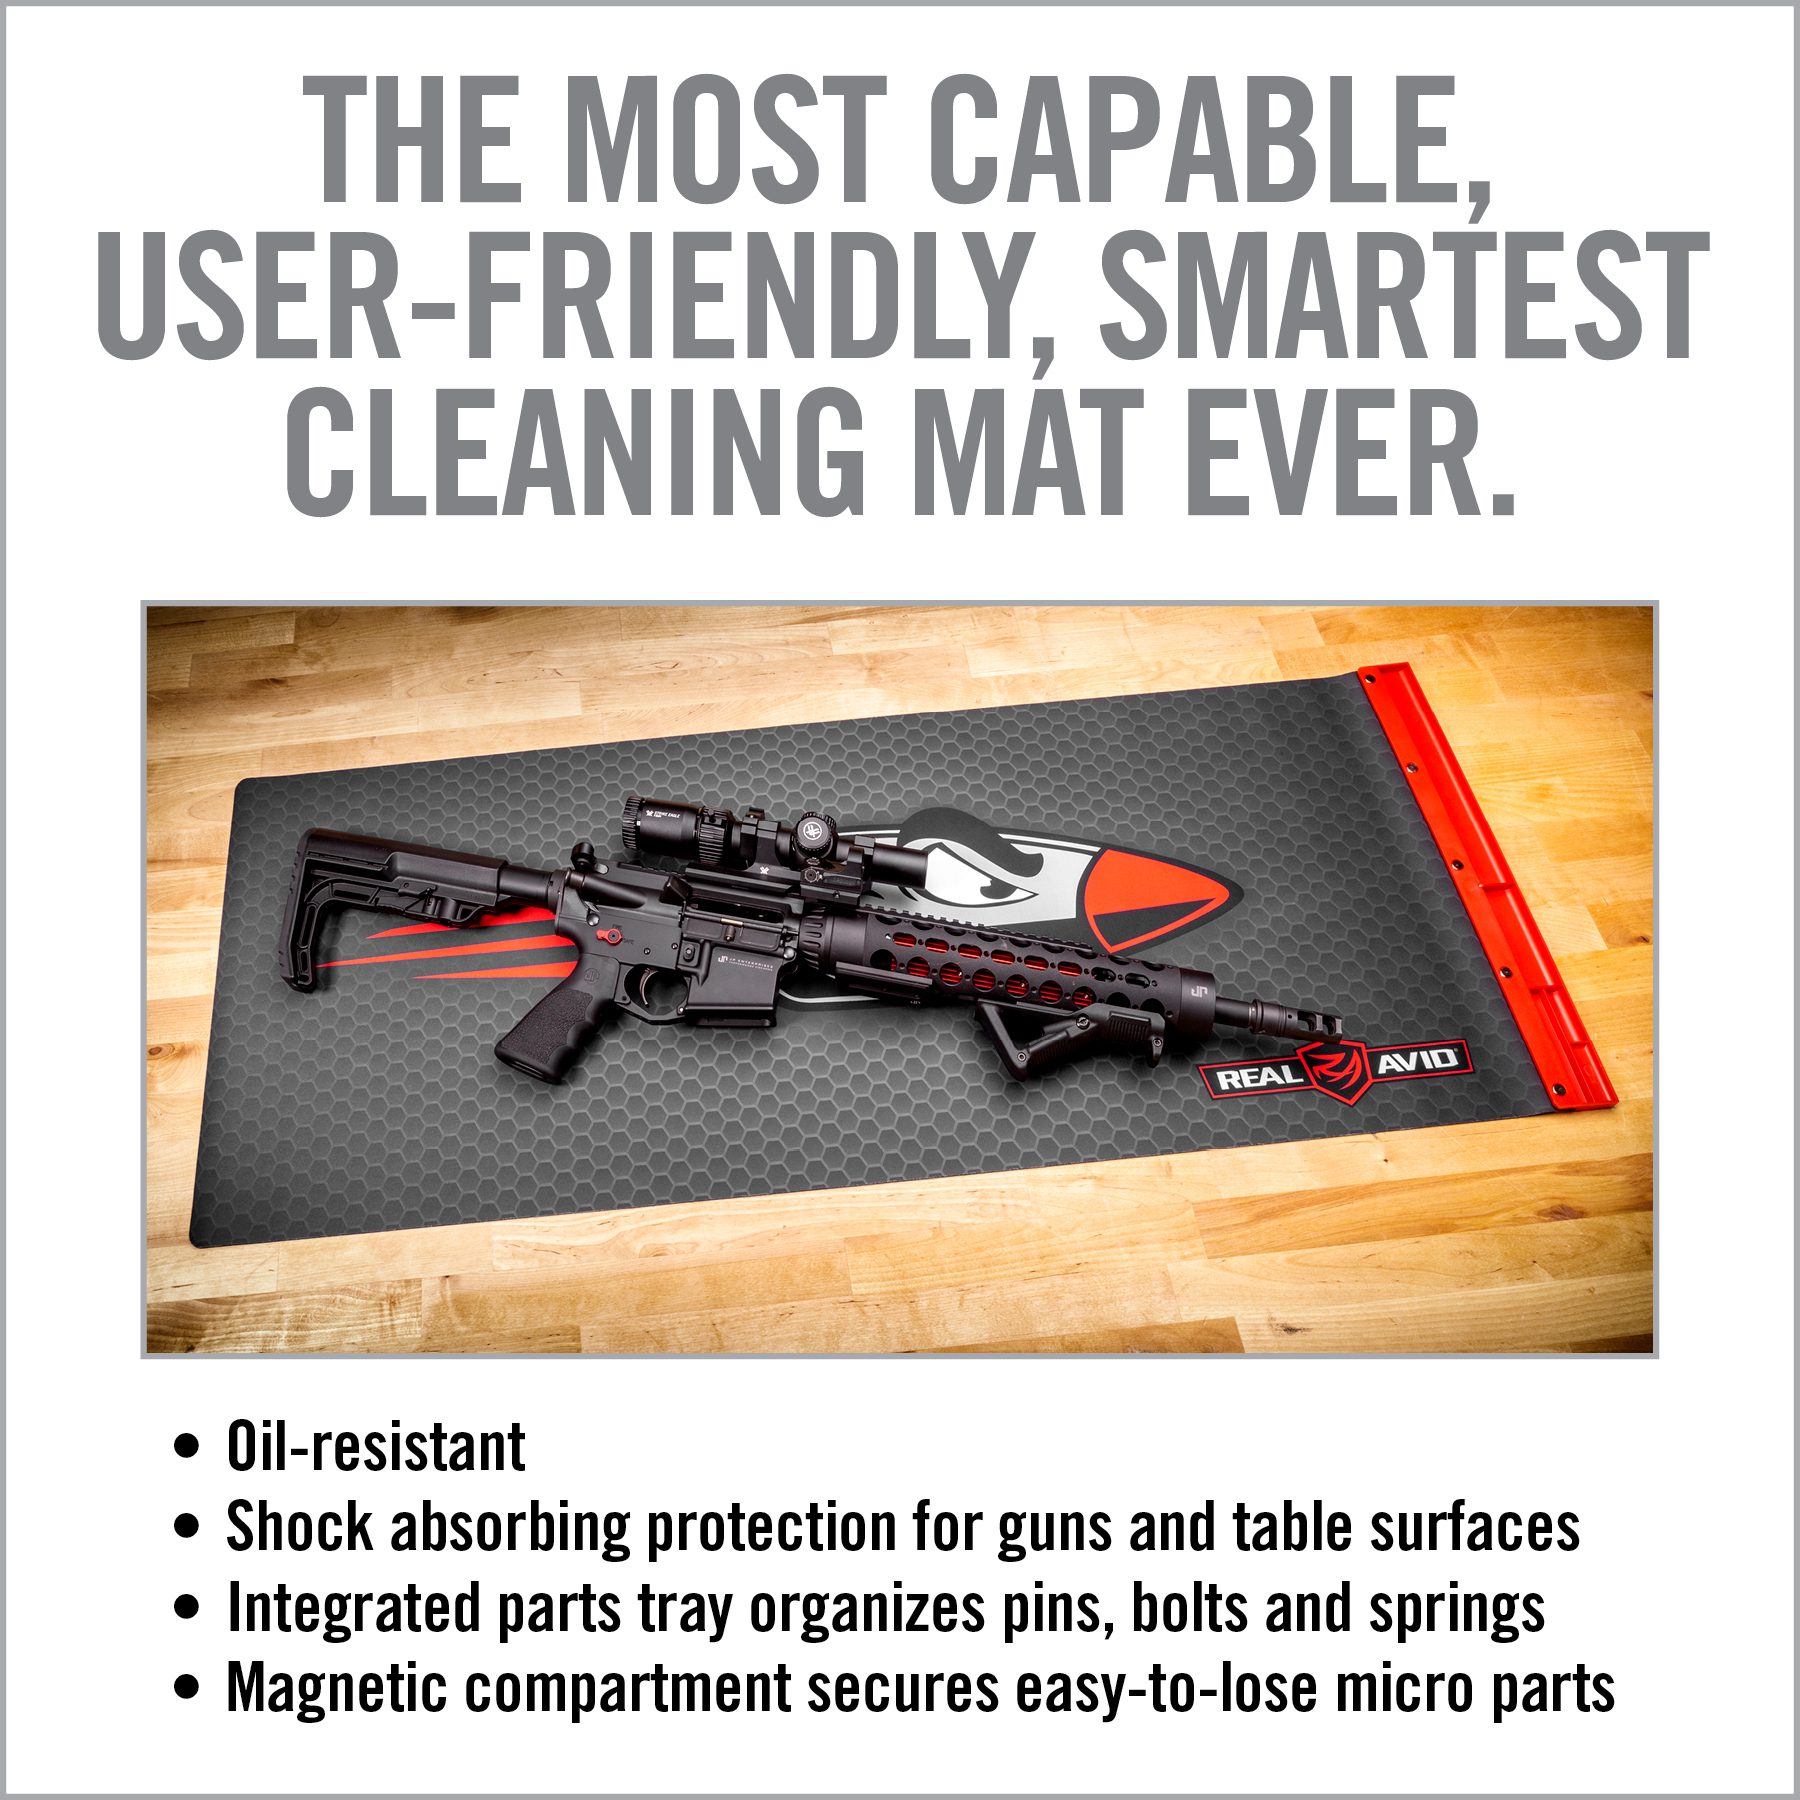 the most capable user - friendly, smartest cleaning mat ever